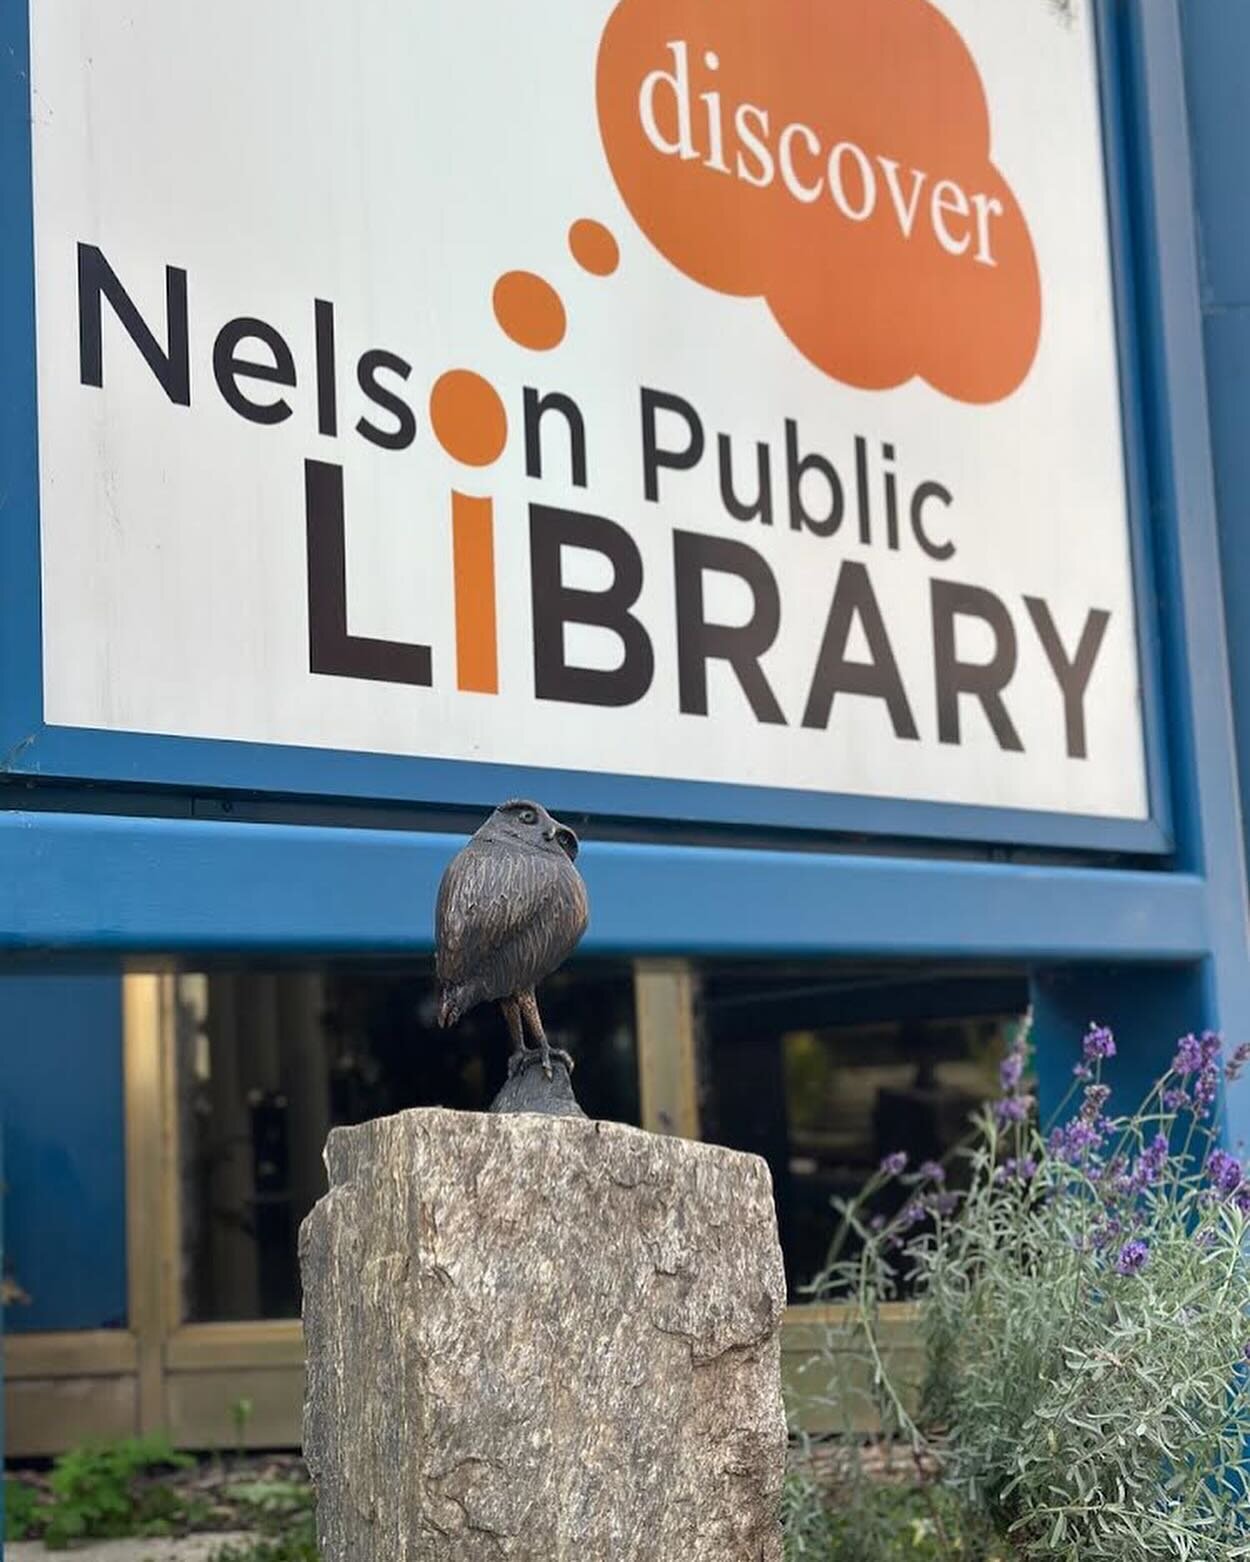 The first edition of &ldquo;Howdy, Bird&rdquo; was purchased and is now permanently installed outside the public library in Nelson, BC.  Huge thanks to the great folks @castlegarsculpturewalk and @city.nelson!

I give 10% of all sales of the editions